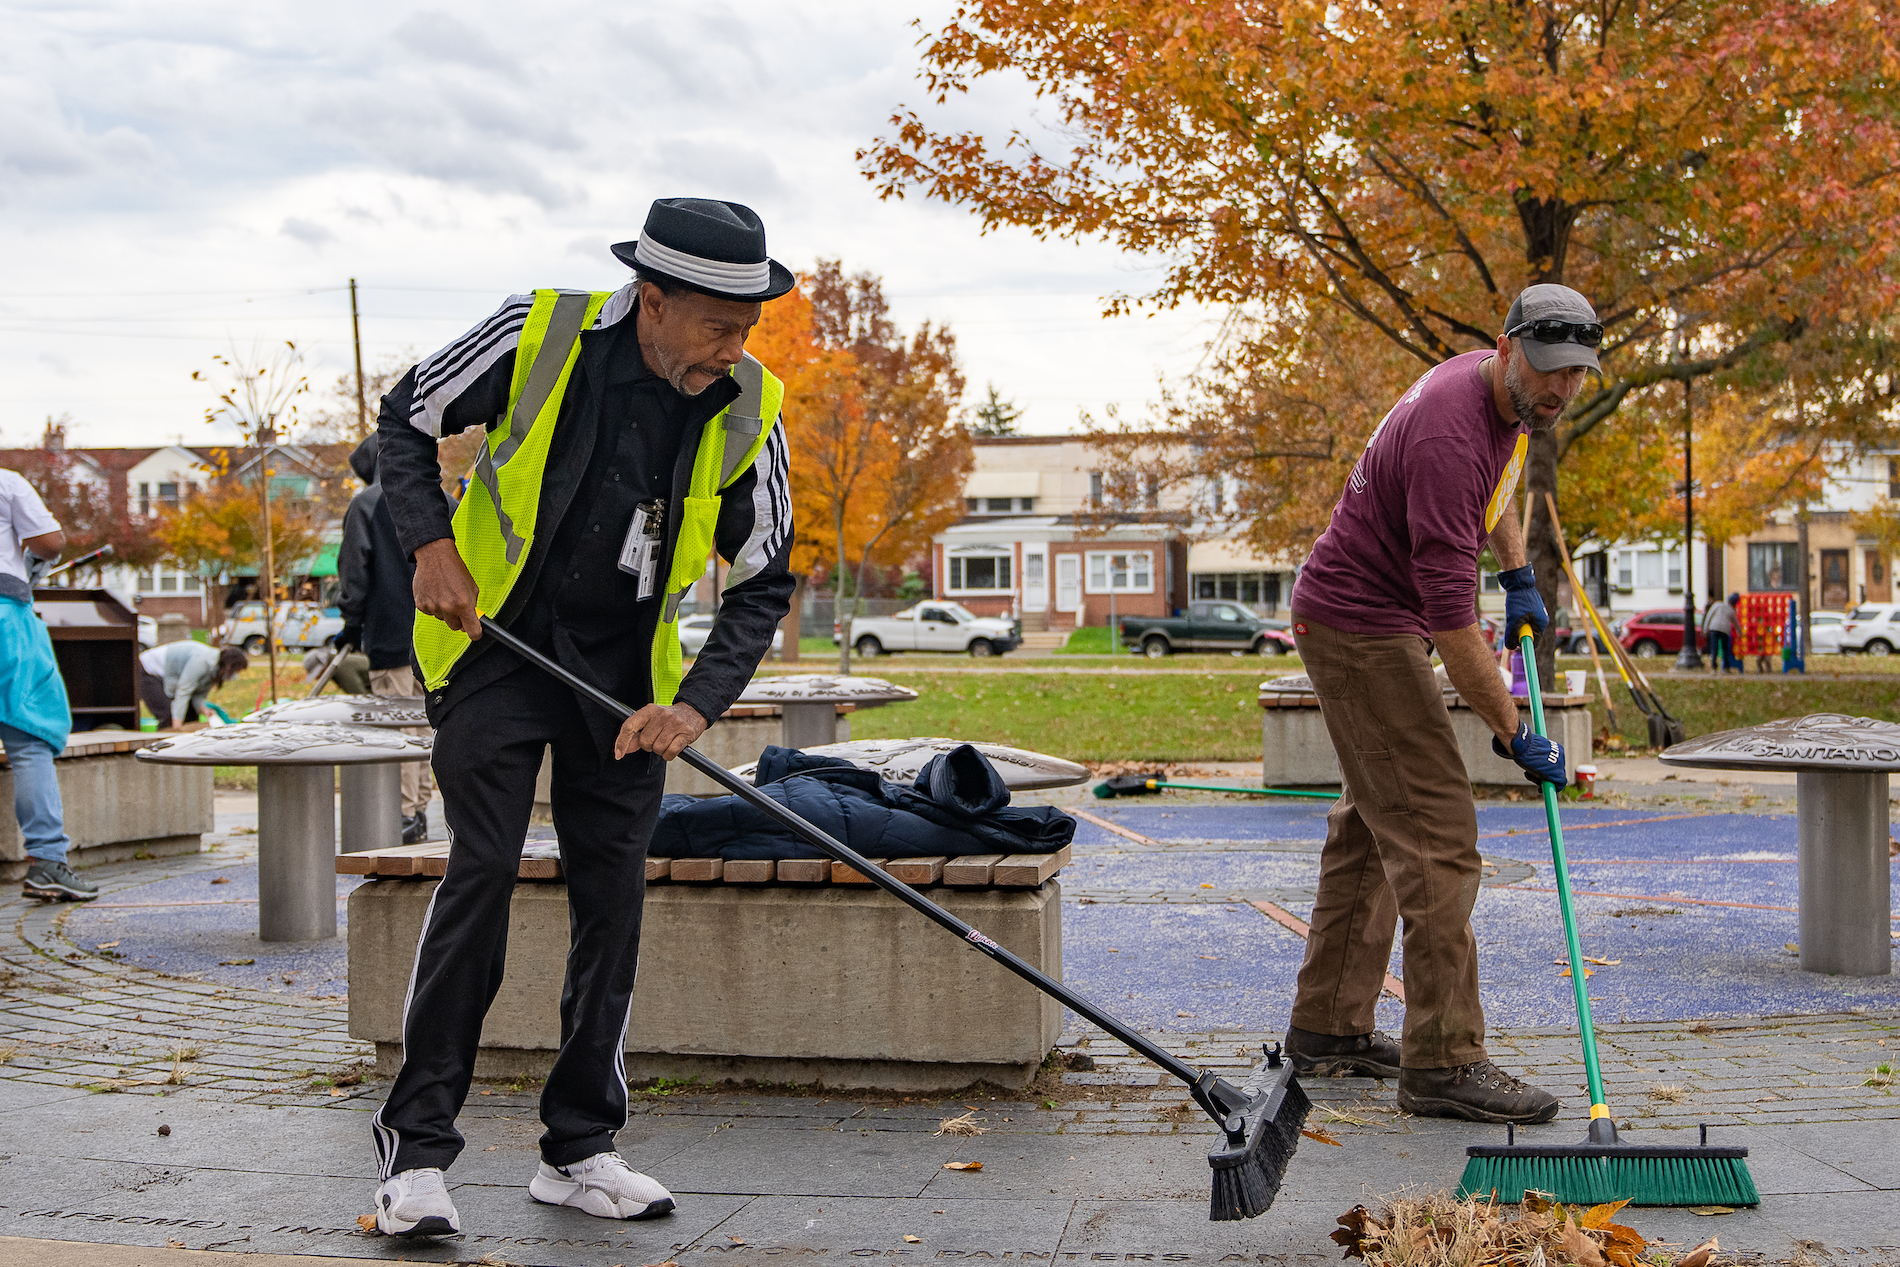 two men participating in the City's "Love Your Park" cleanup event, sweeping leaves at The Labor Monument in Southwest Philadelphia